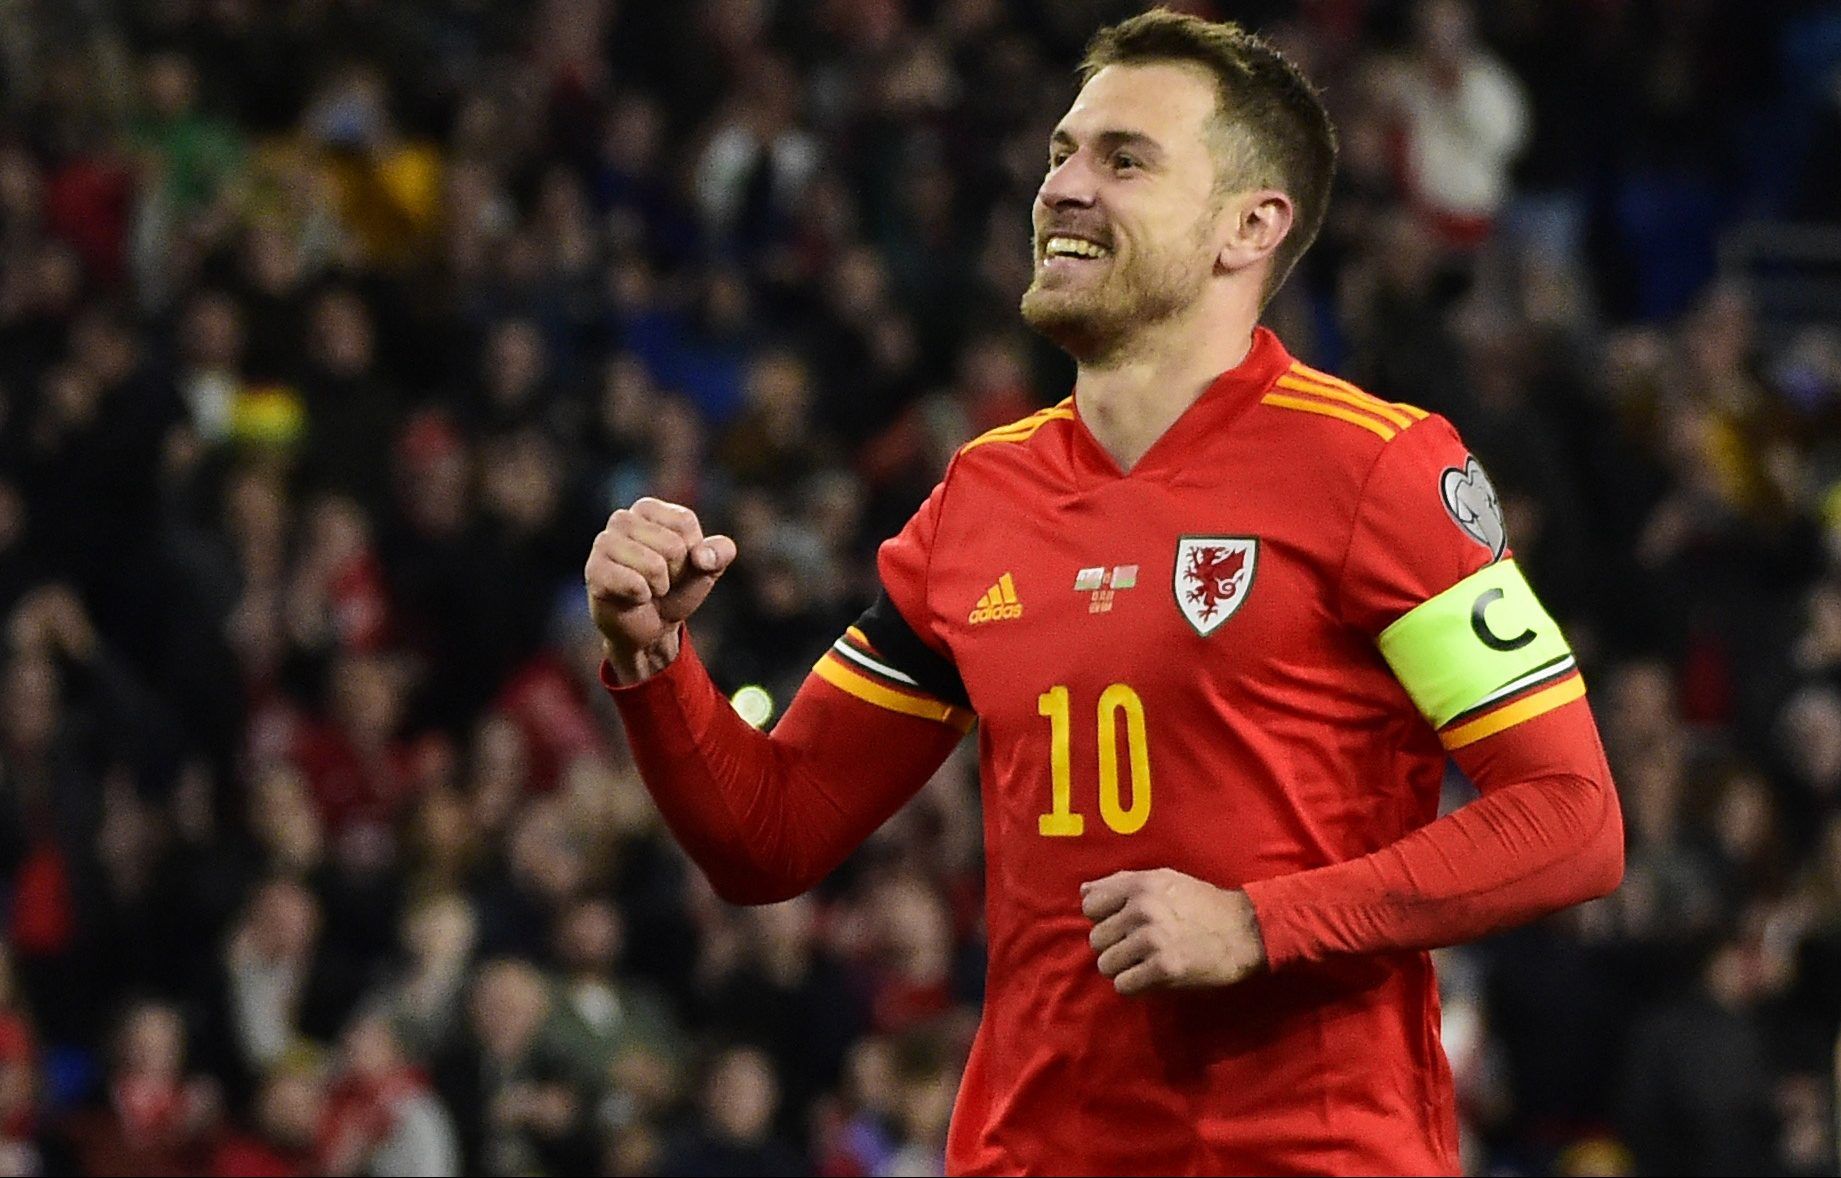 Soccer Football - World Cup - UEFA Qualifiers - Group E - Wales v Belarus - Cardiff City Stadium, Cardiff, Wales, Britain - November 13, 2021 Wales' Aaron Ramsey celebrates scoring their third goal Reuters/Rebecca Naden